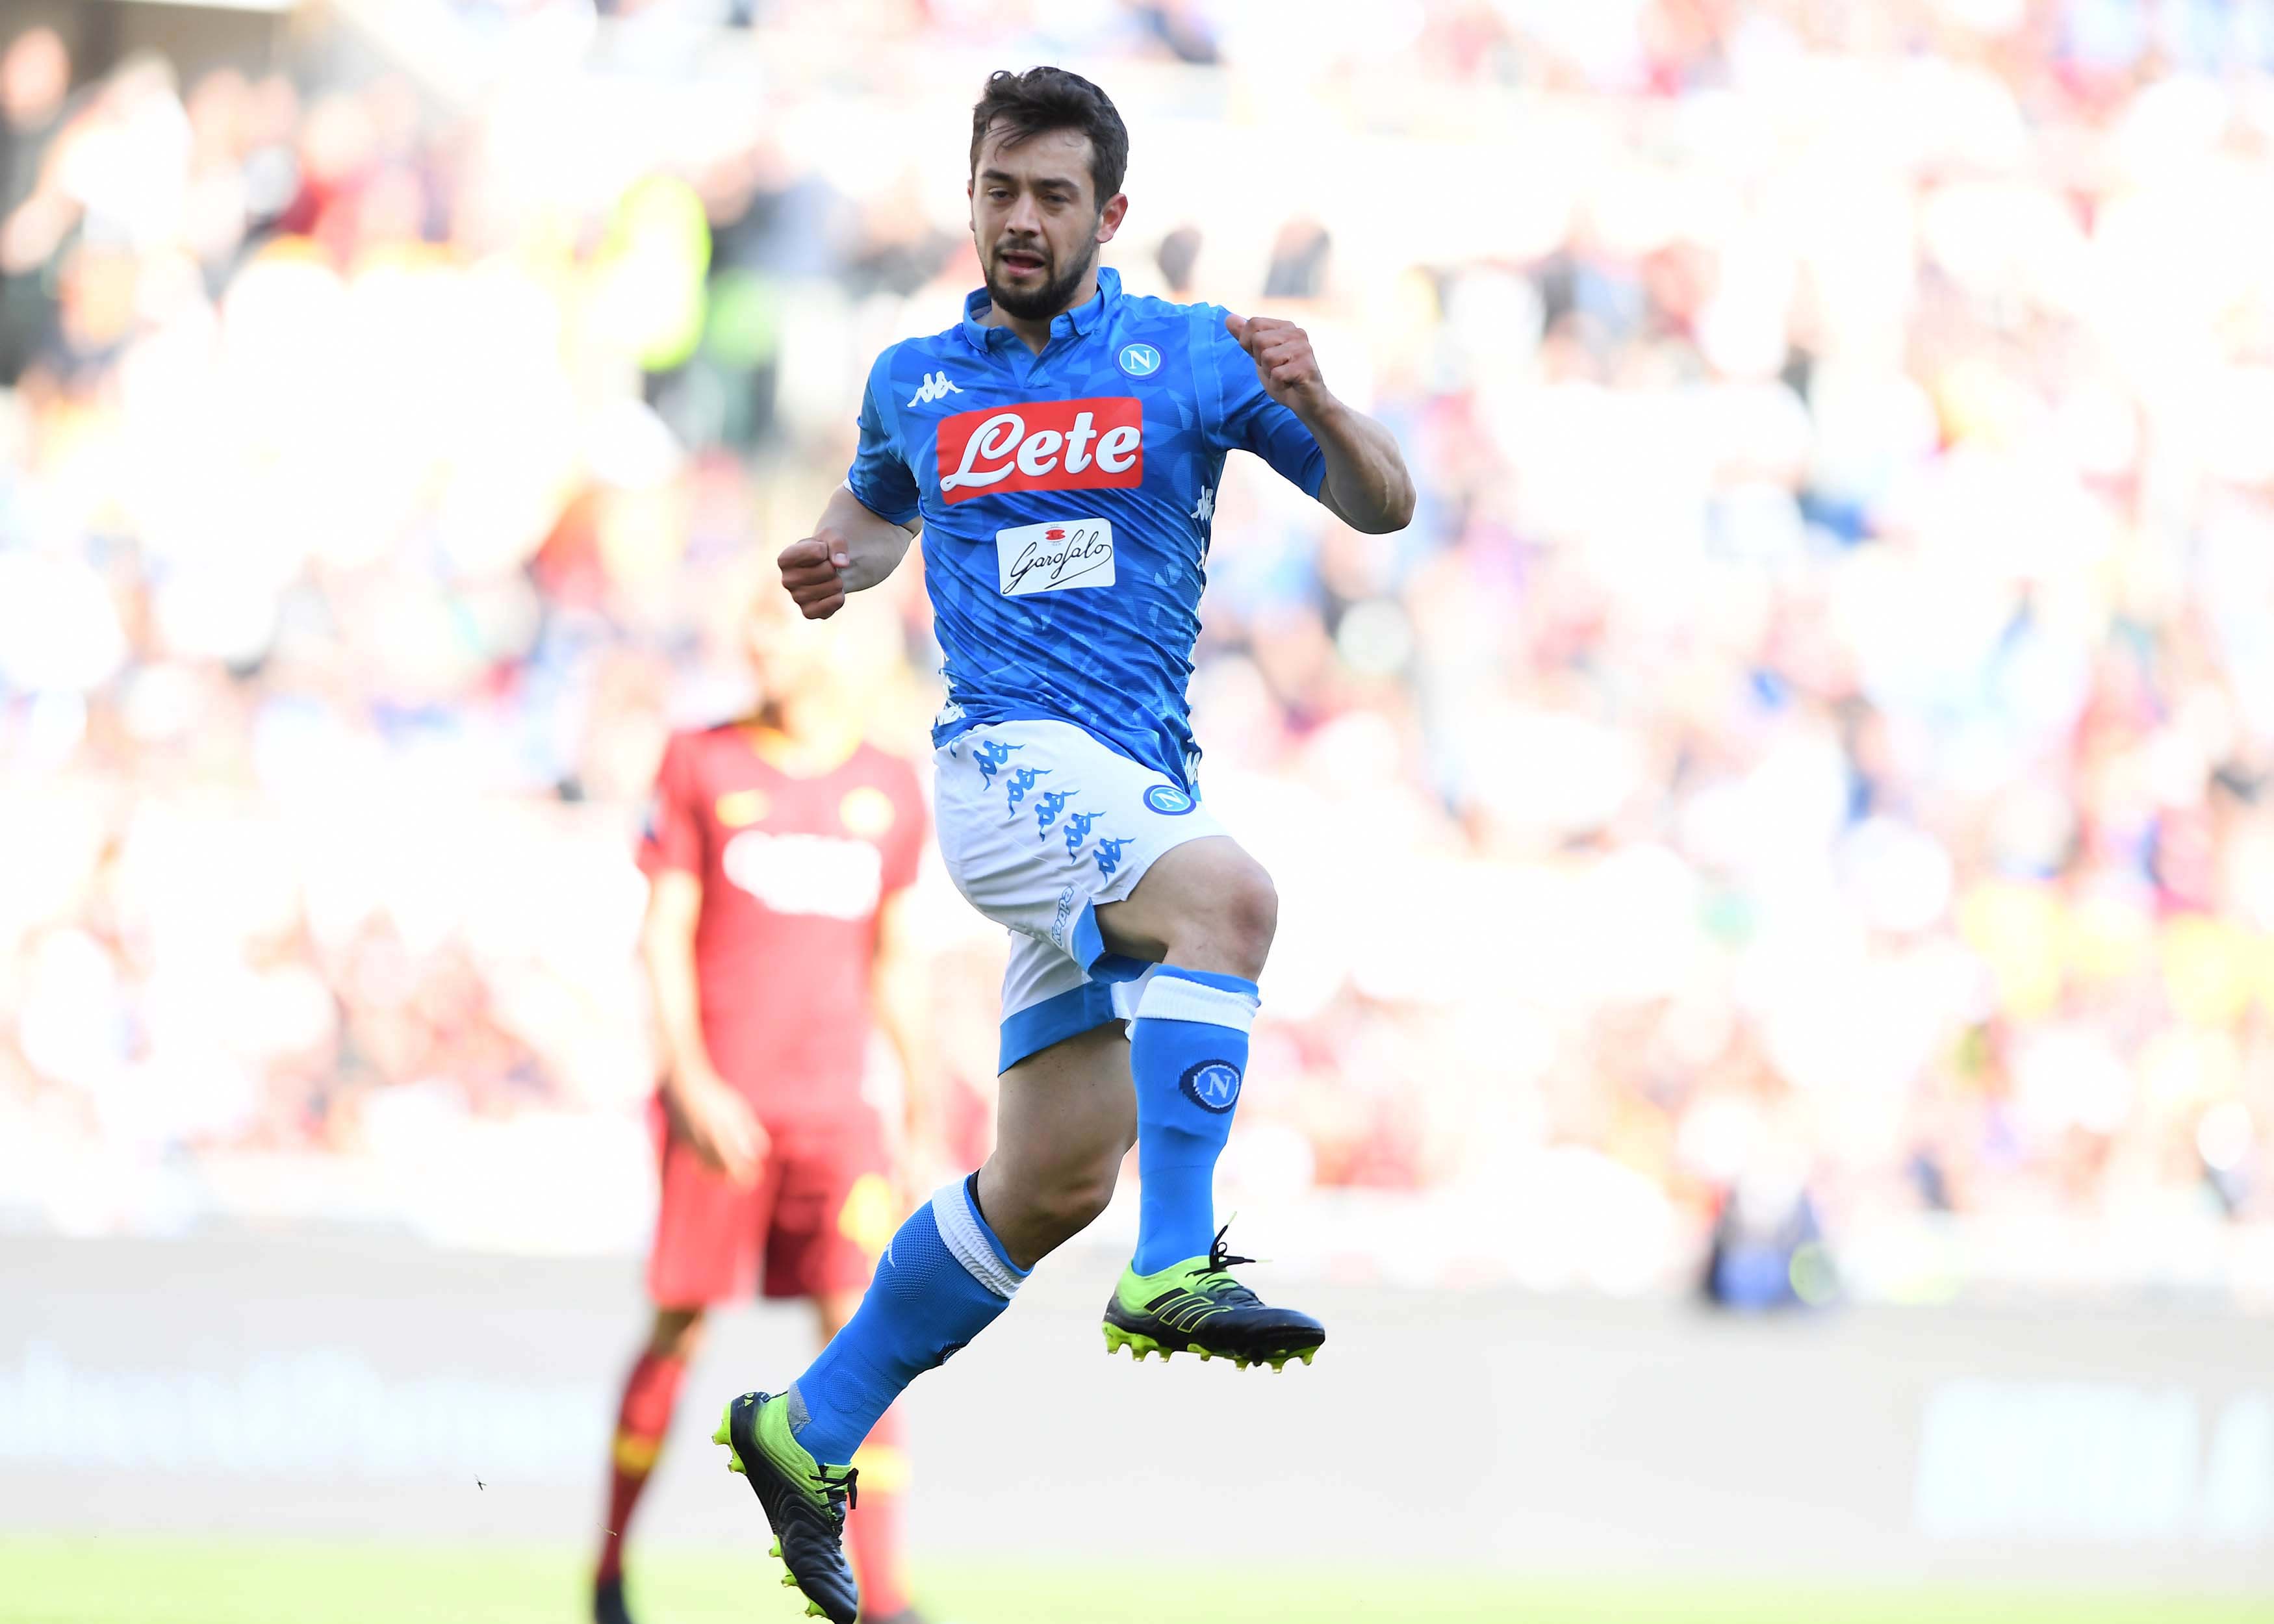 ROME, ITALY - MARCH 31:  Amin Younes  of Napoli celebrates after scoring the first goal  during the Serie A match between AS Roma and SSC Napoli at Stadio Olimpico on March 31, 2019 in Rome, Italy.  (Photo by Ciro Sarpa  SSC NAPOLI/SSC NAPOLI via Getty Images)